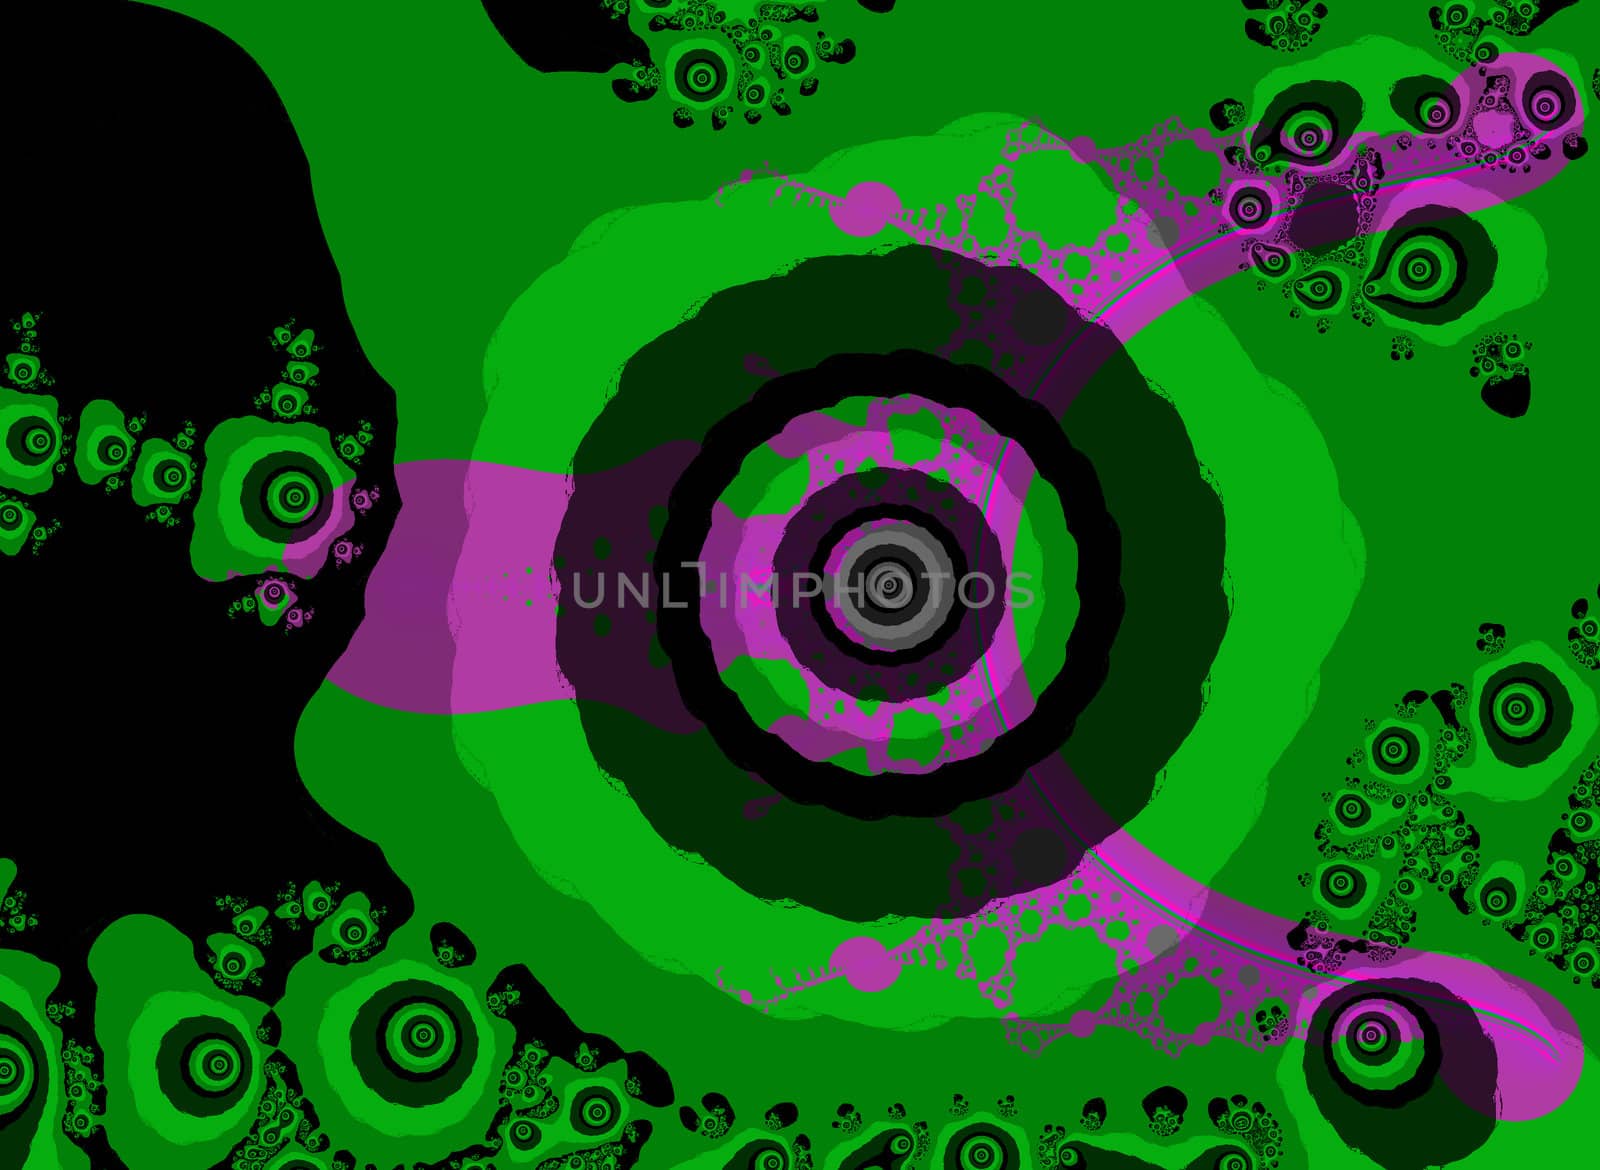 Green and Purple Fractal Design With Eye Shape by bobbigmac